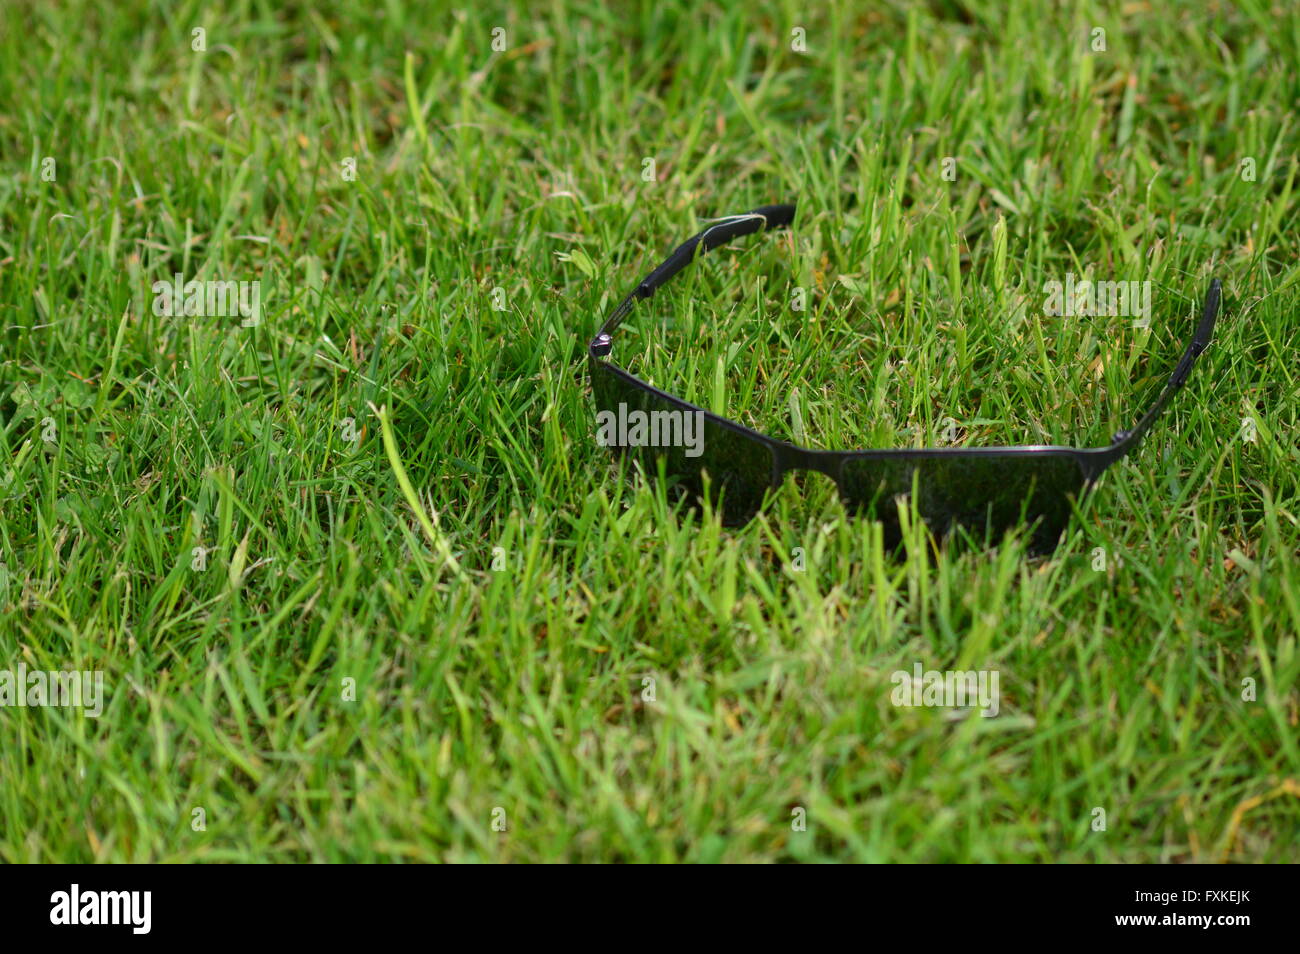 The Sunglasses in the green Grass Stock Photo